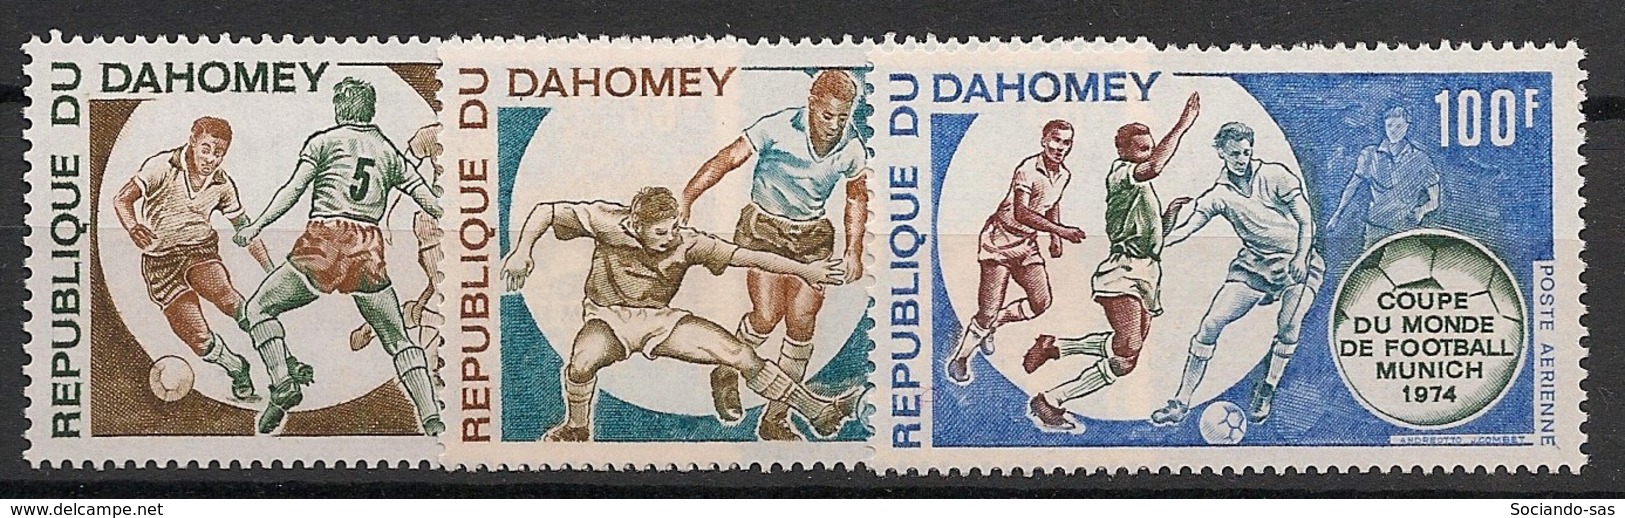 Dahomey - 1973 - Poste Aérienne PA N°Yv. 196 à 198 - Football World Cup - Neuf Luxe ** / MNH / Postfrisch - 1974 – Germania Ovest